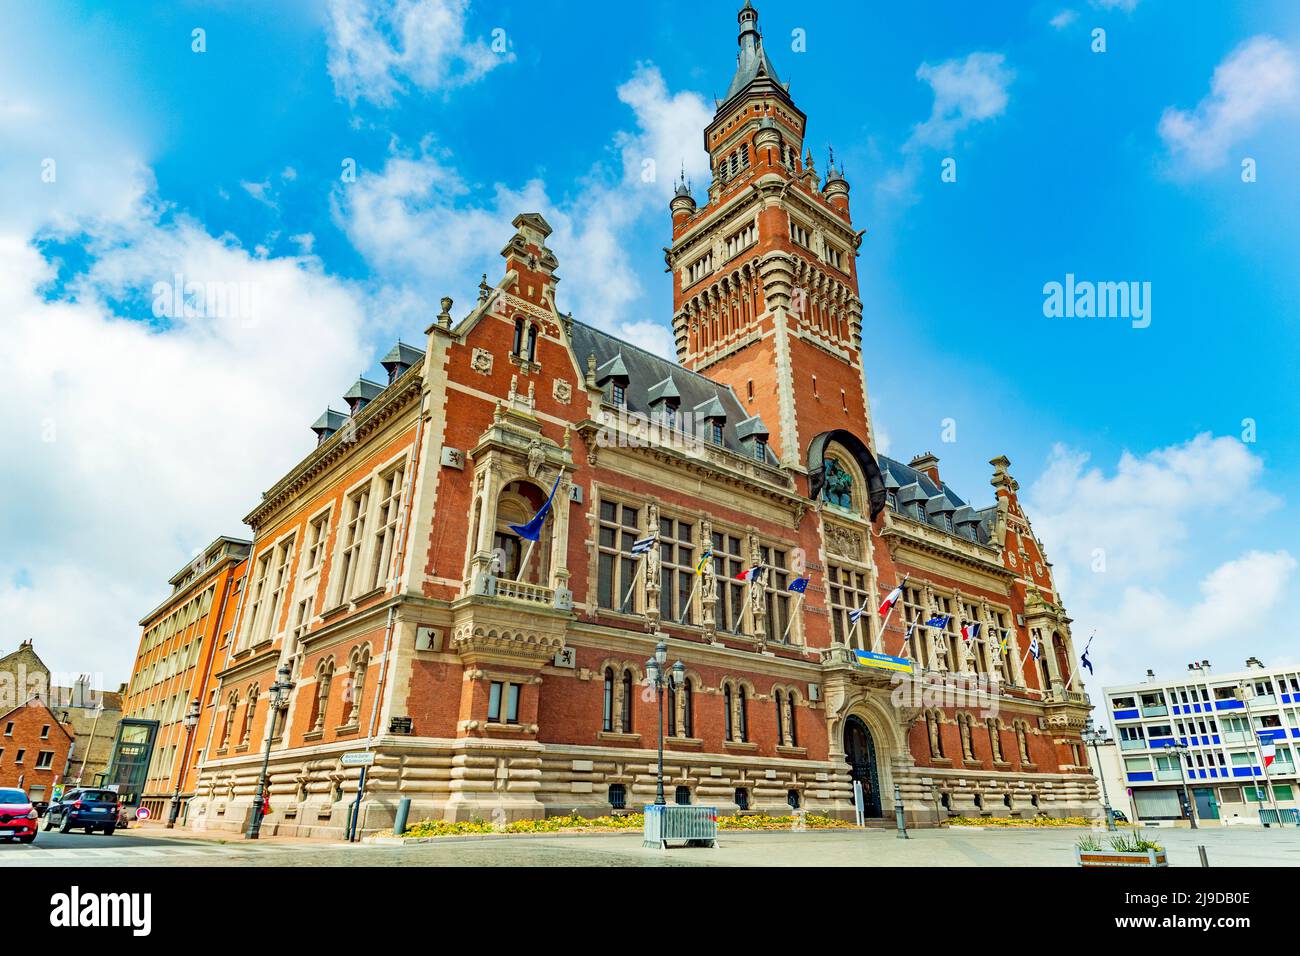 Dunkerque, city in northern France, town hall built in neo-flamand archtectural style in early 20th century Stock Photo